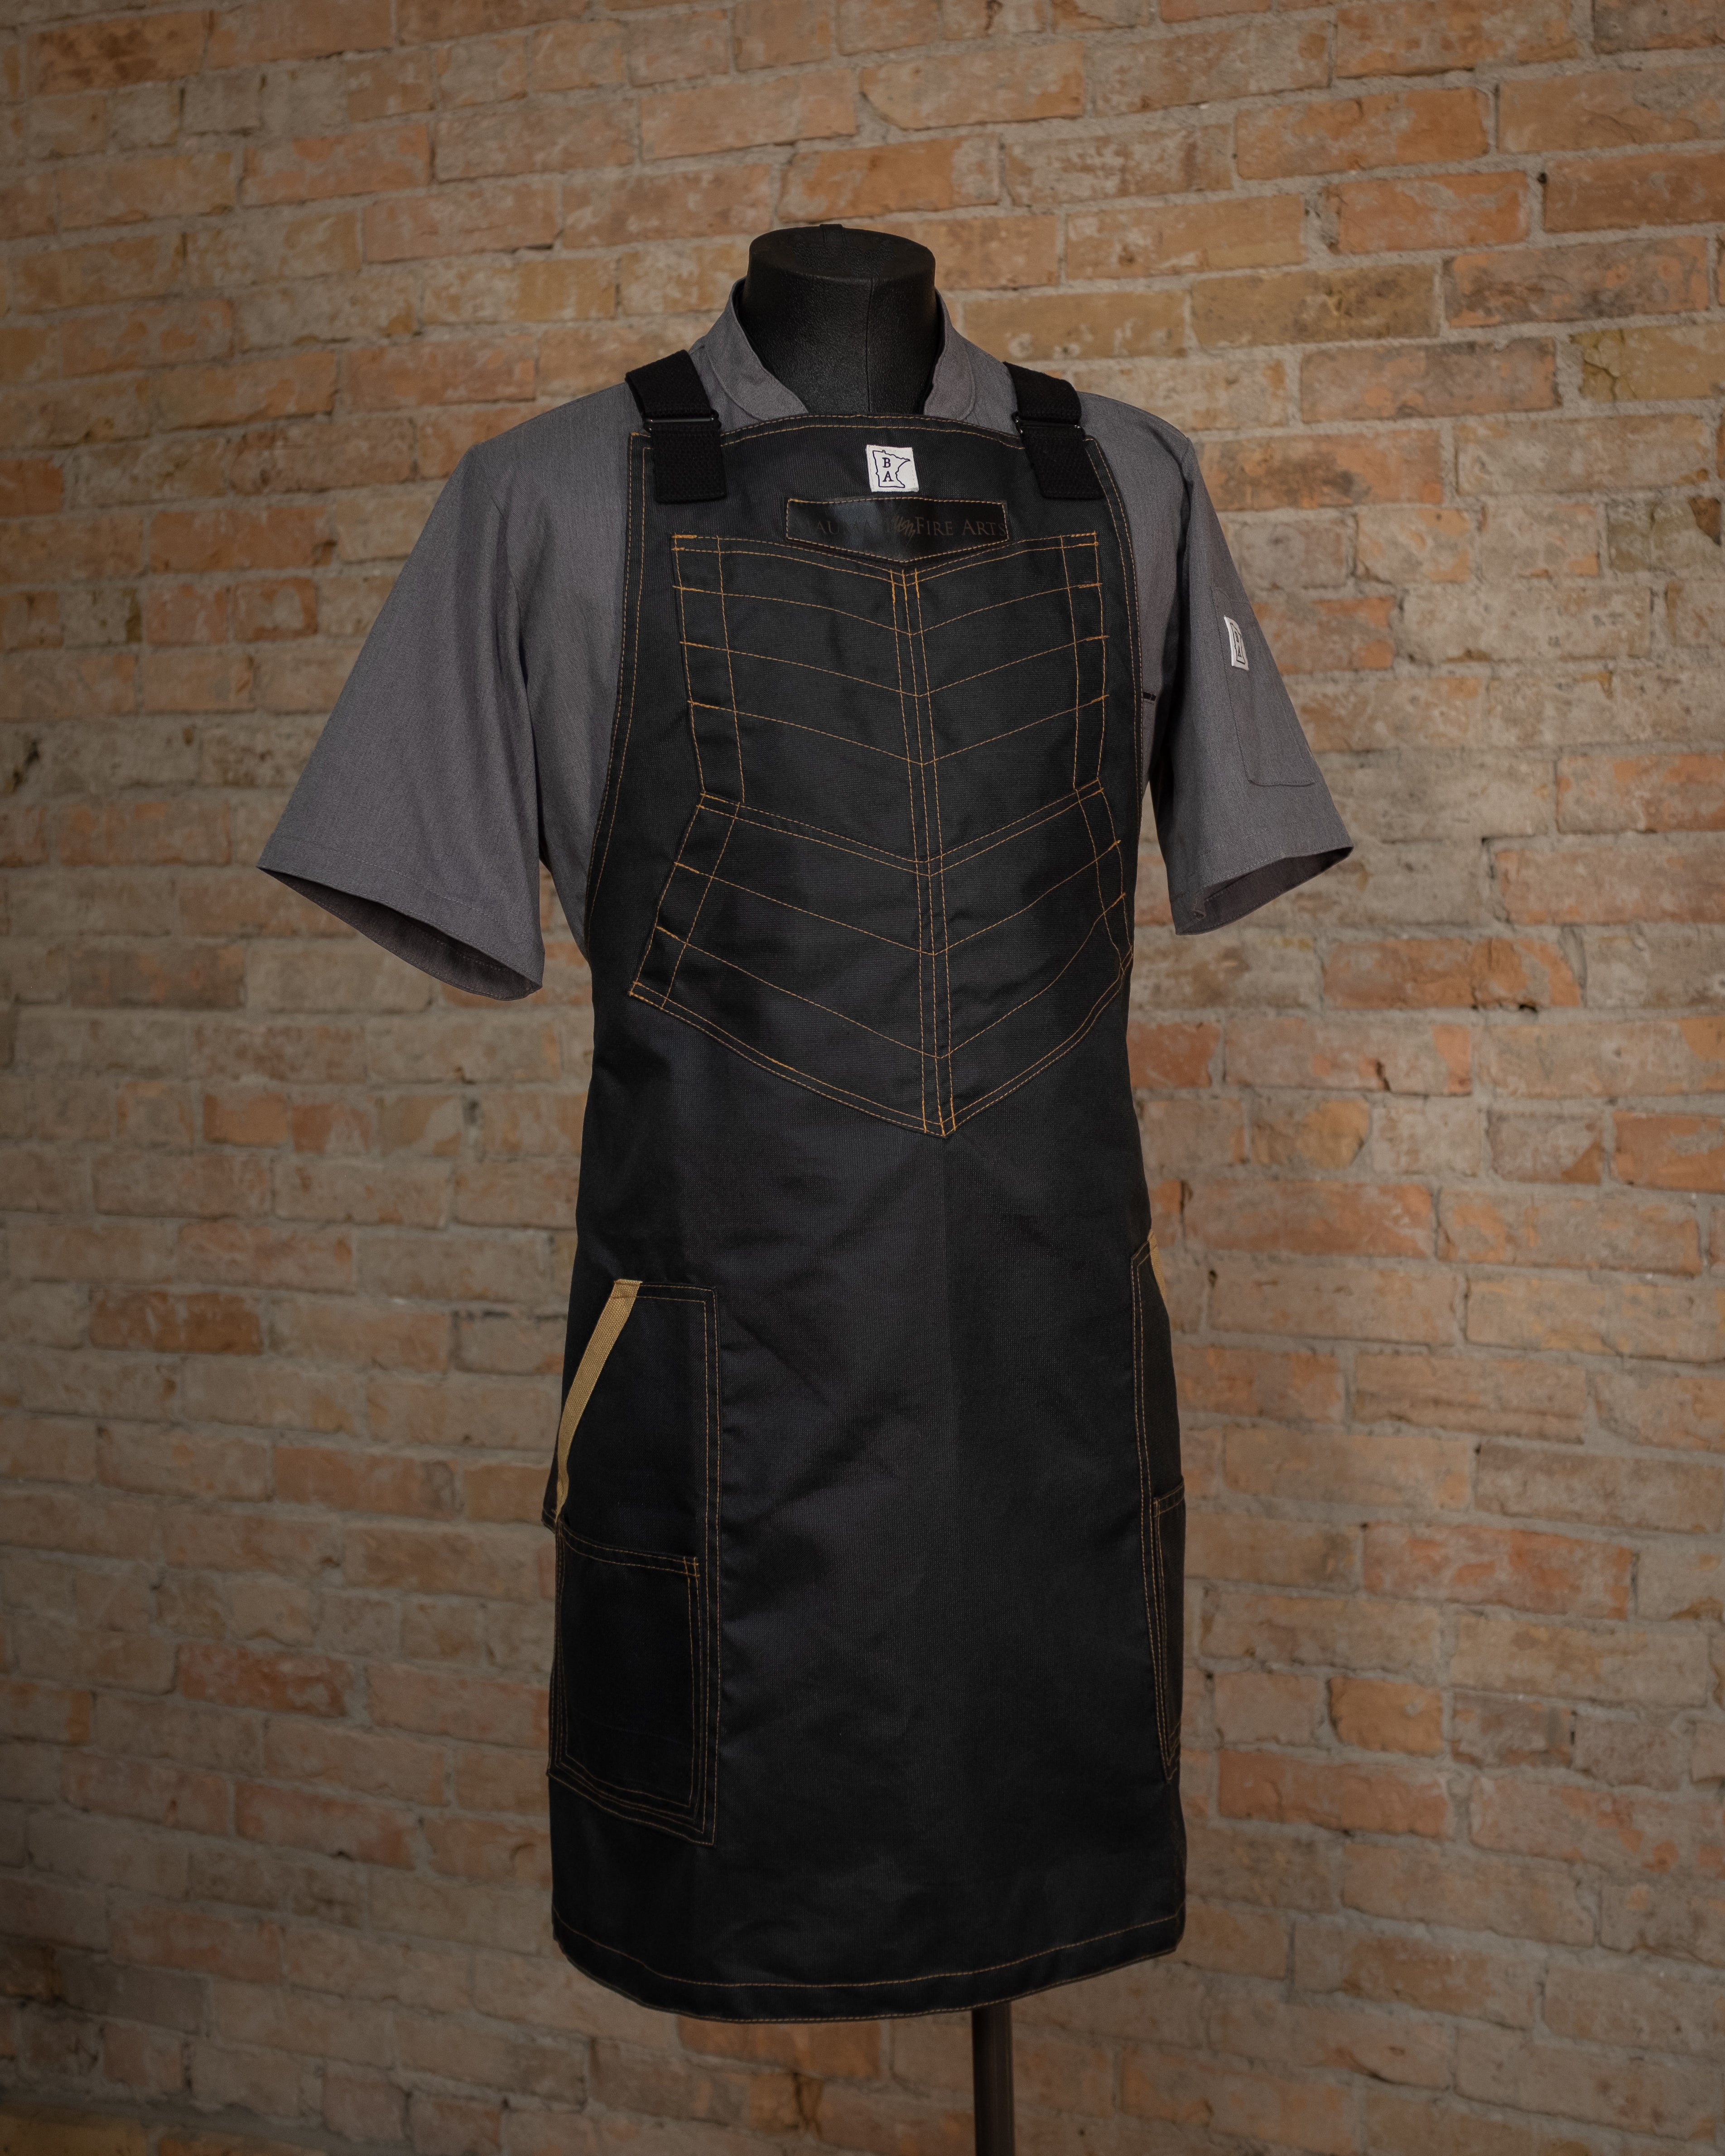 The heavy duty design 'BAMF', displayed on a mannequin over a gray chef  coat in front of a brick background. Both the chef coat and apron were designed and produced by Craftmade Aprons, Minnesota.